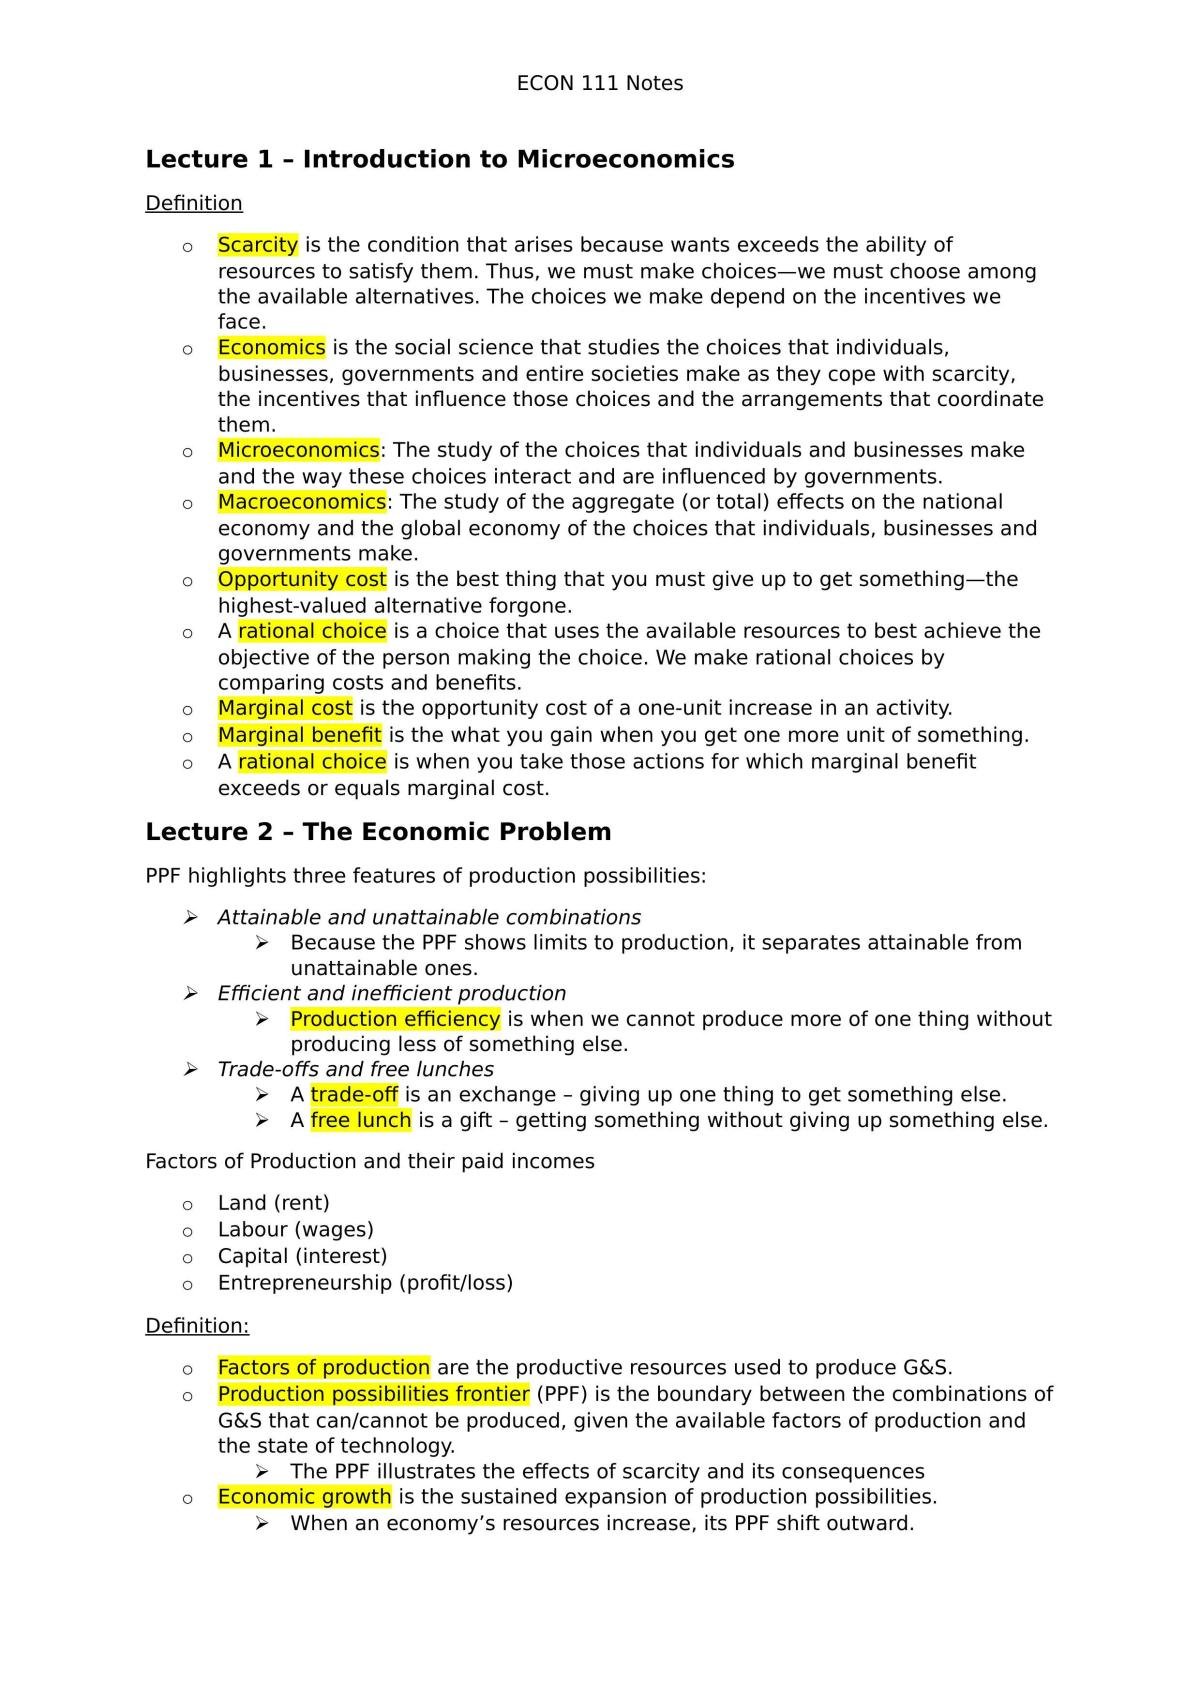 ECON111 Study Guide - Page 1